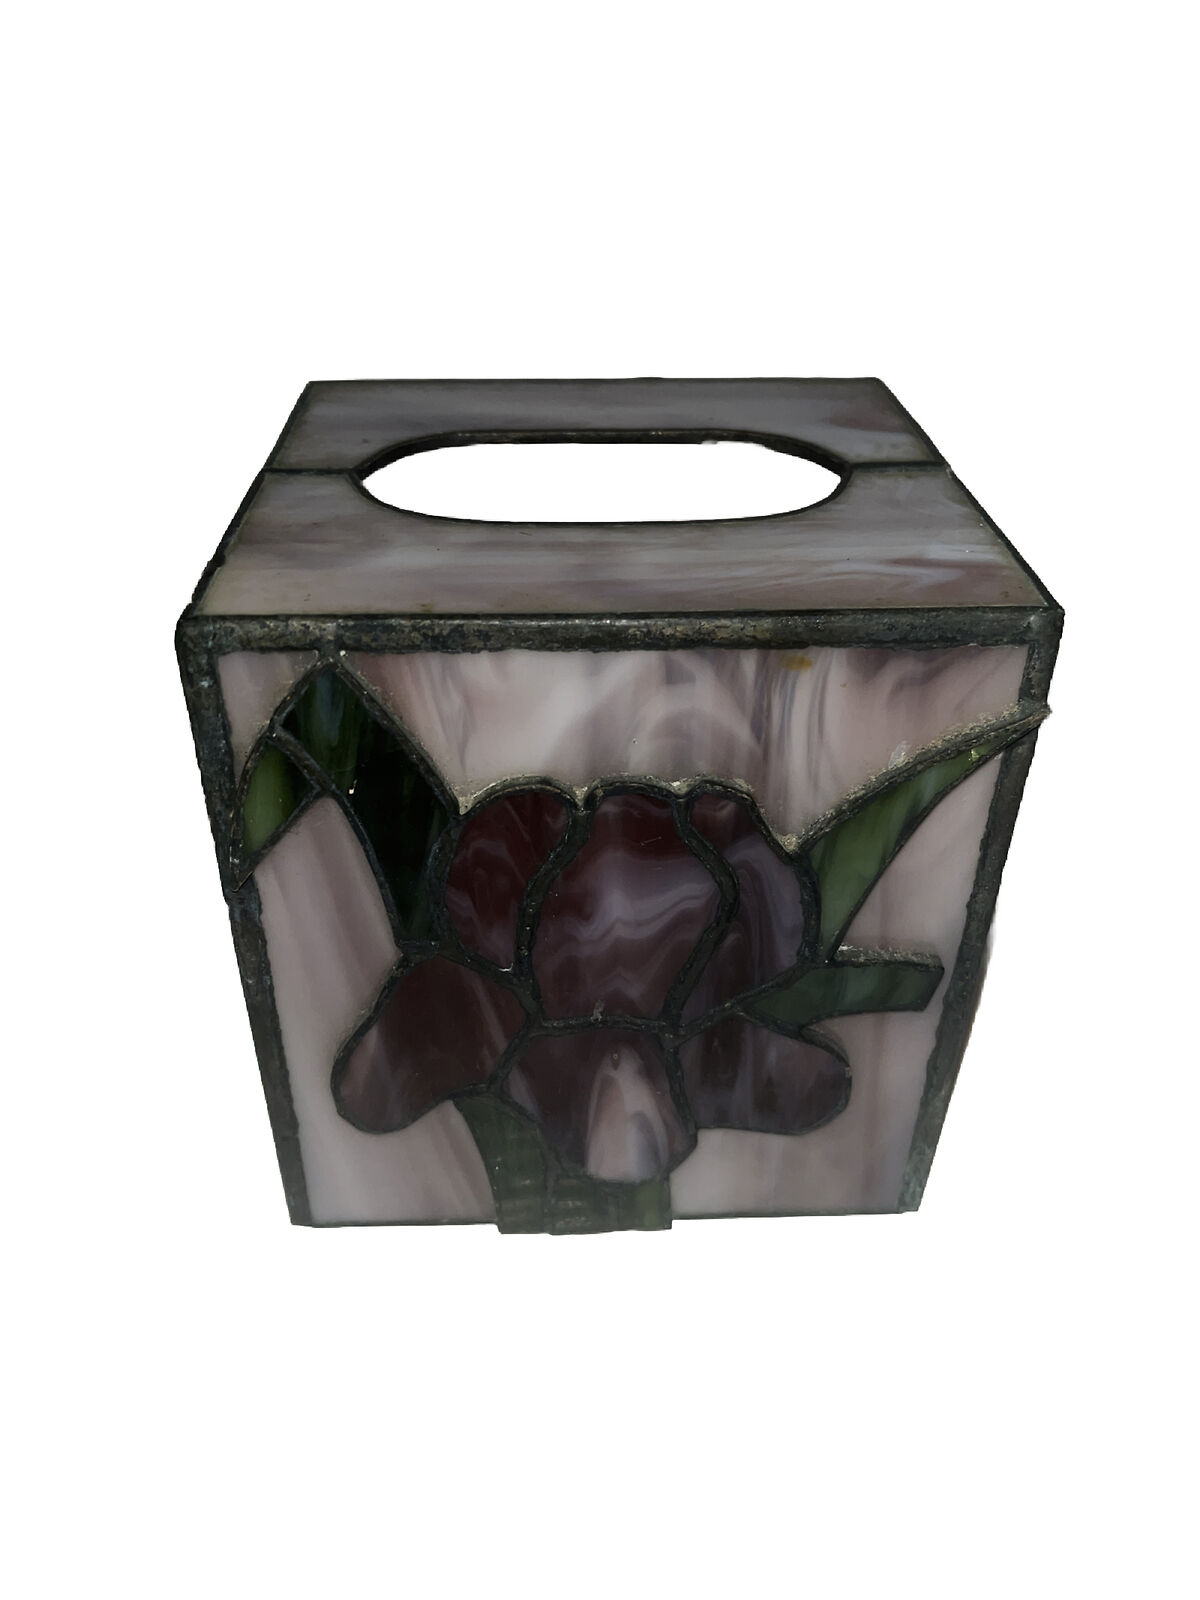 LEADED STAINED GLASS SQUARE TISSUE BOX HOLDER WITH FLOWER PURPLE & GREEN IRIS